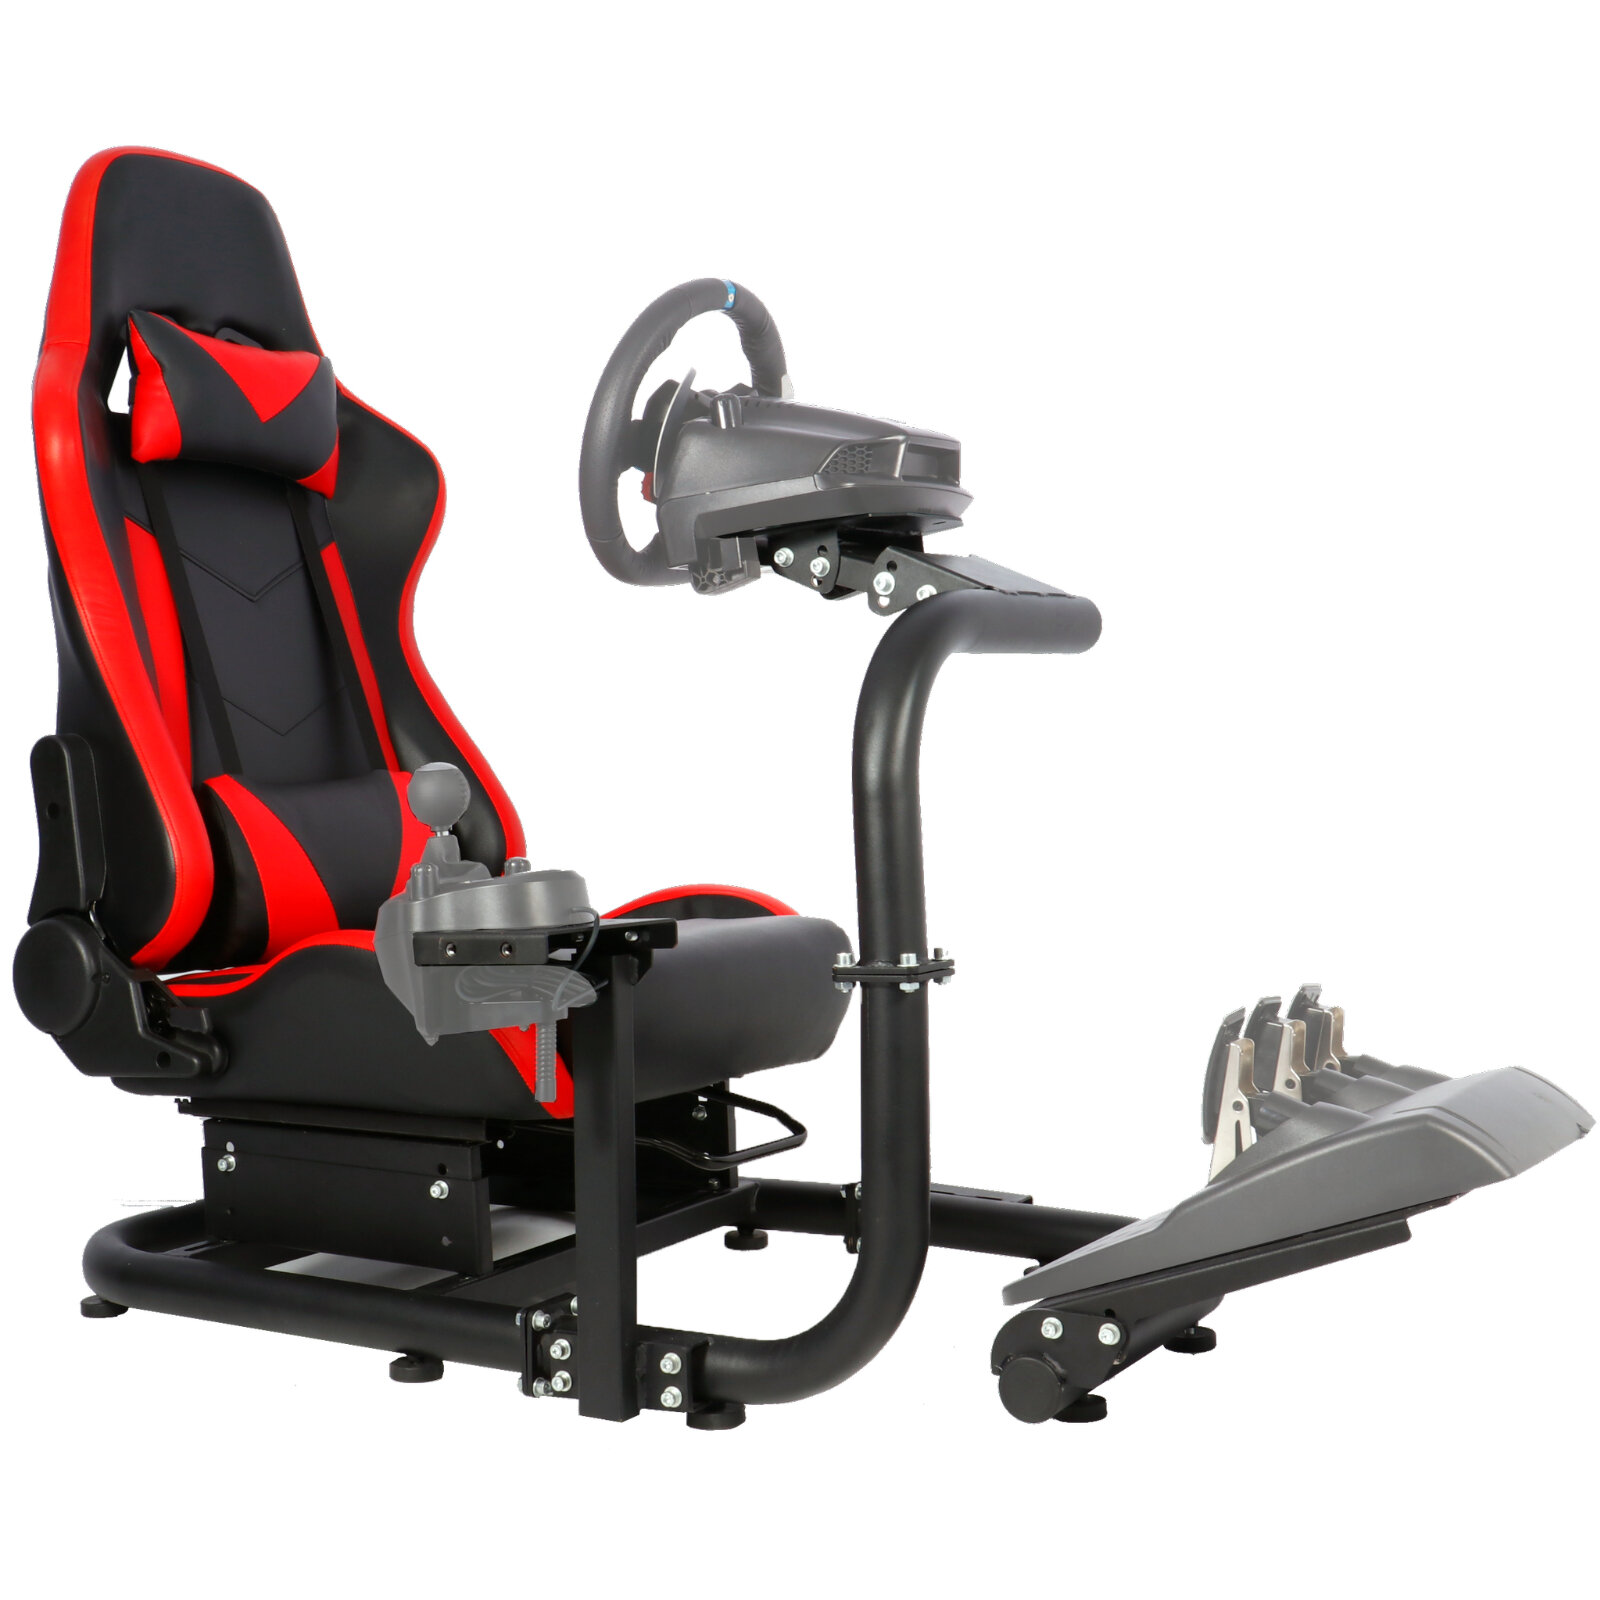 Anman Racing Simulator Cockpit fit for PC PS4 XBOX ONE Racing Wheel Stand Video Game for Logitech G25 G27 G29 G920 Fanatec Clubsport Thrust 並行輸入品